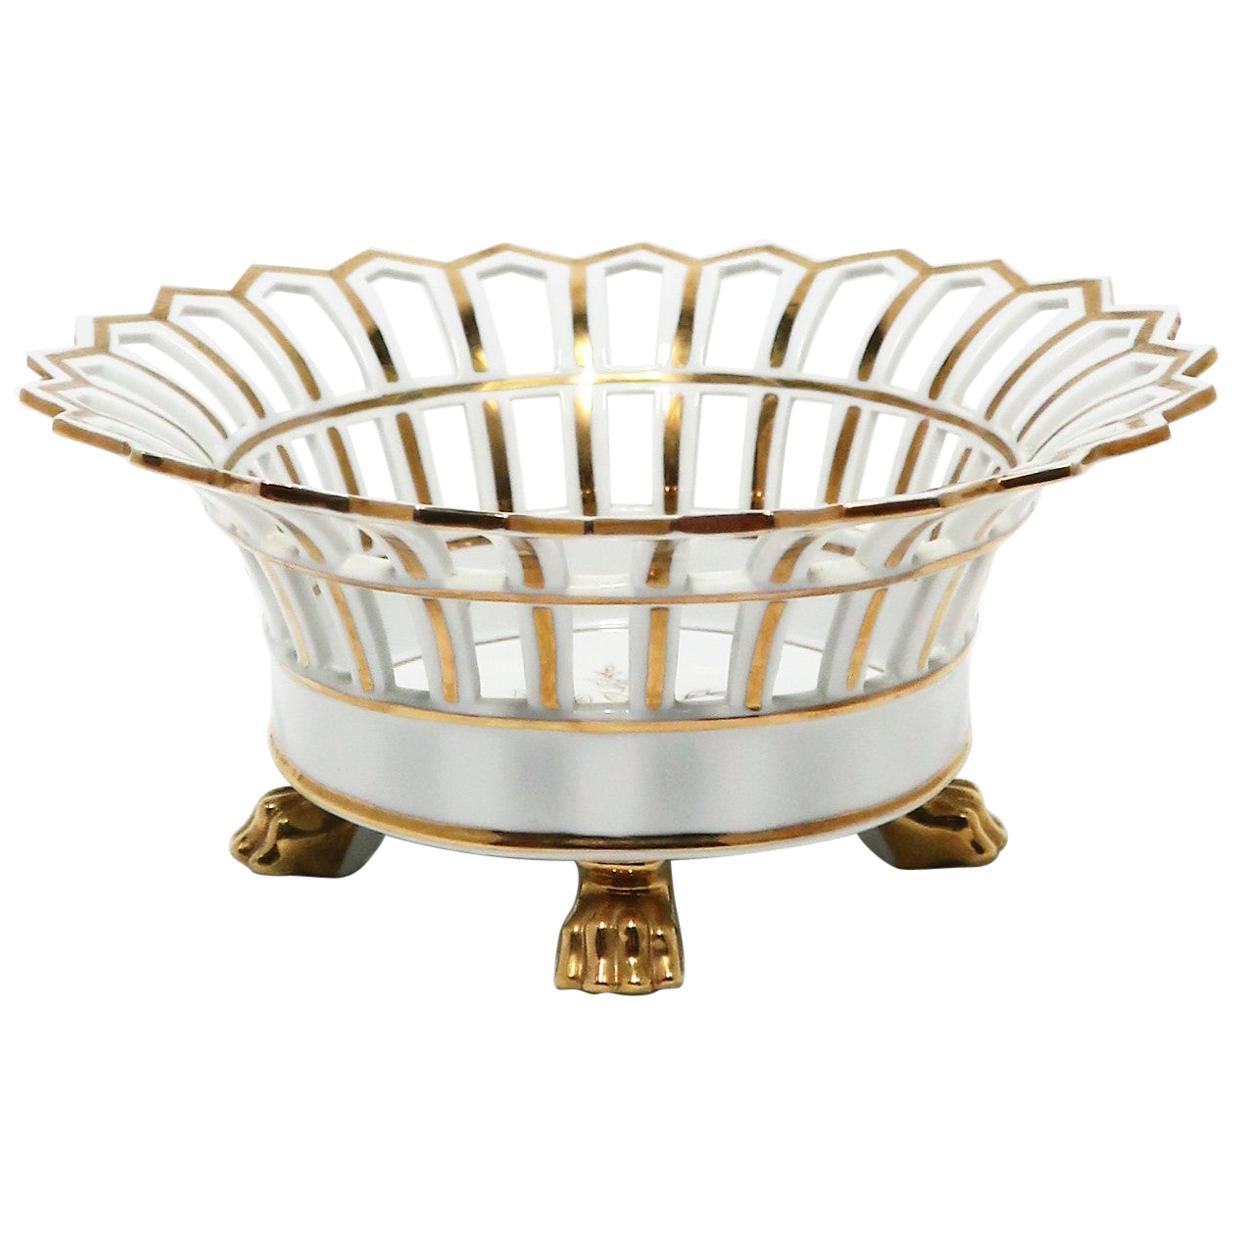 French White and Gold Pierced Porcelain Compote Basket Centerpiece Bowl